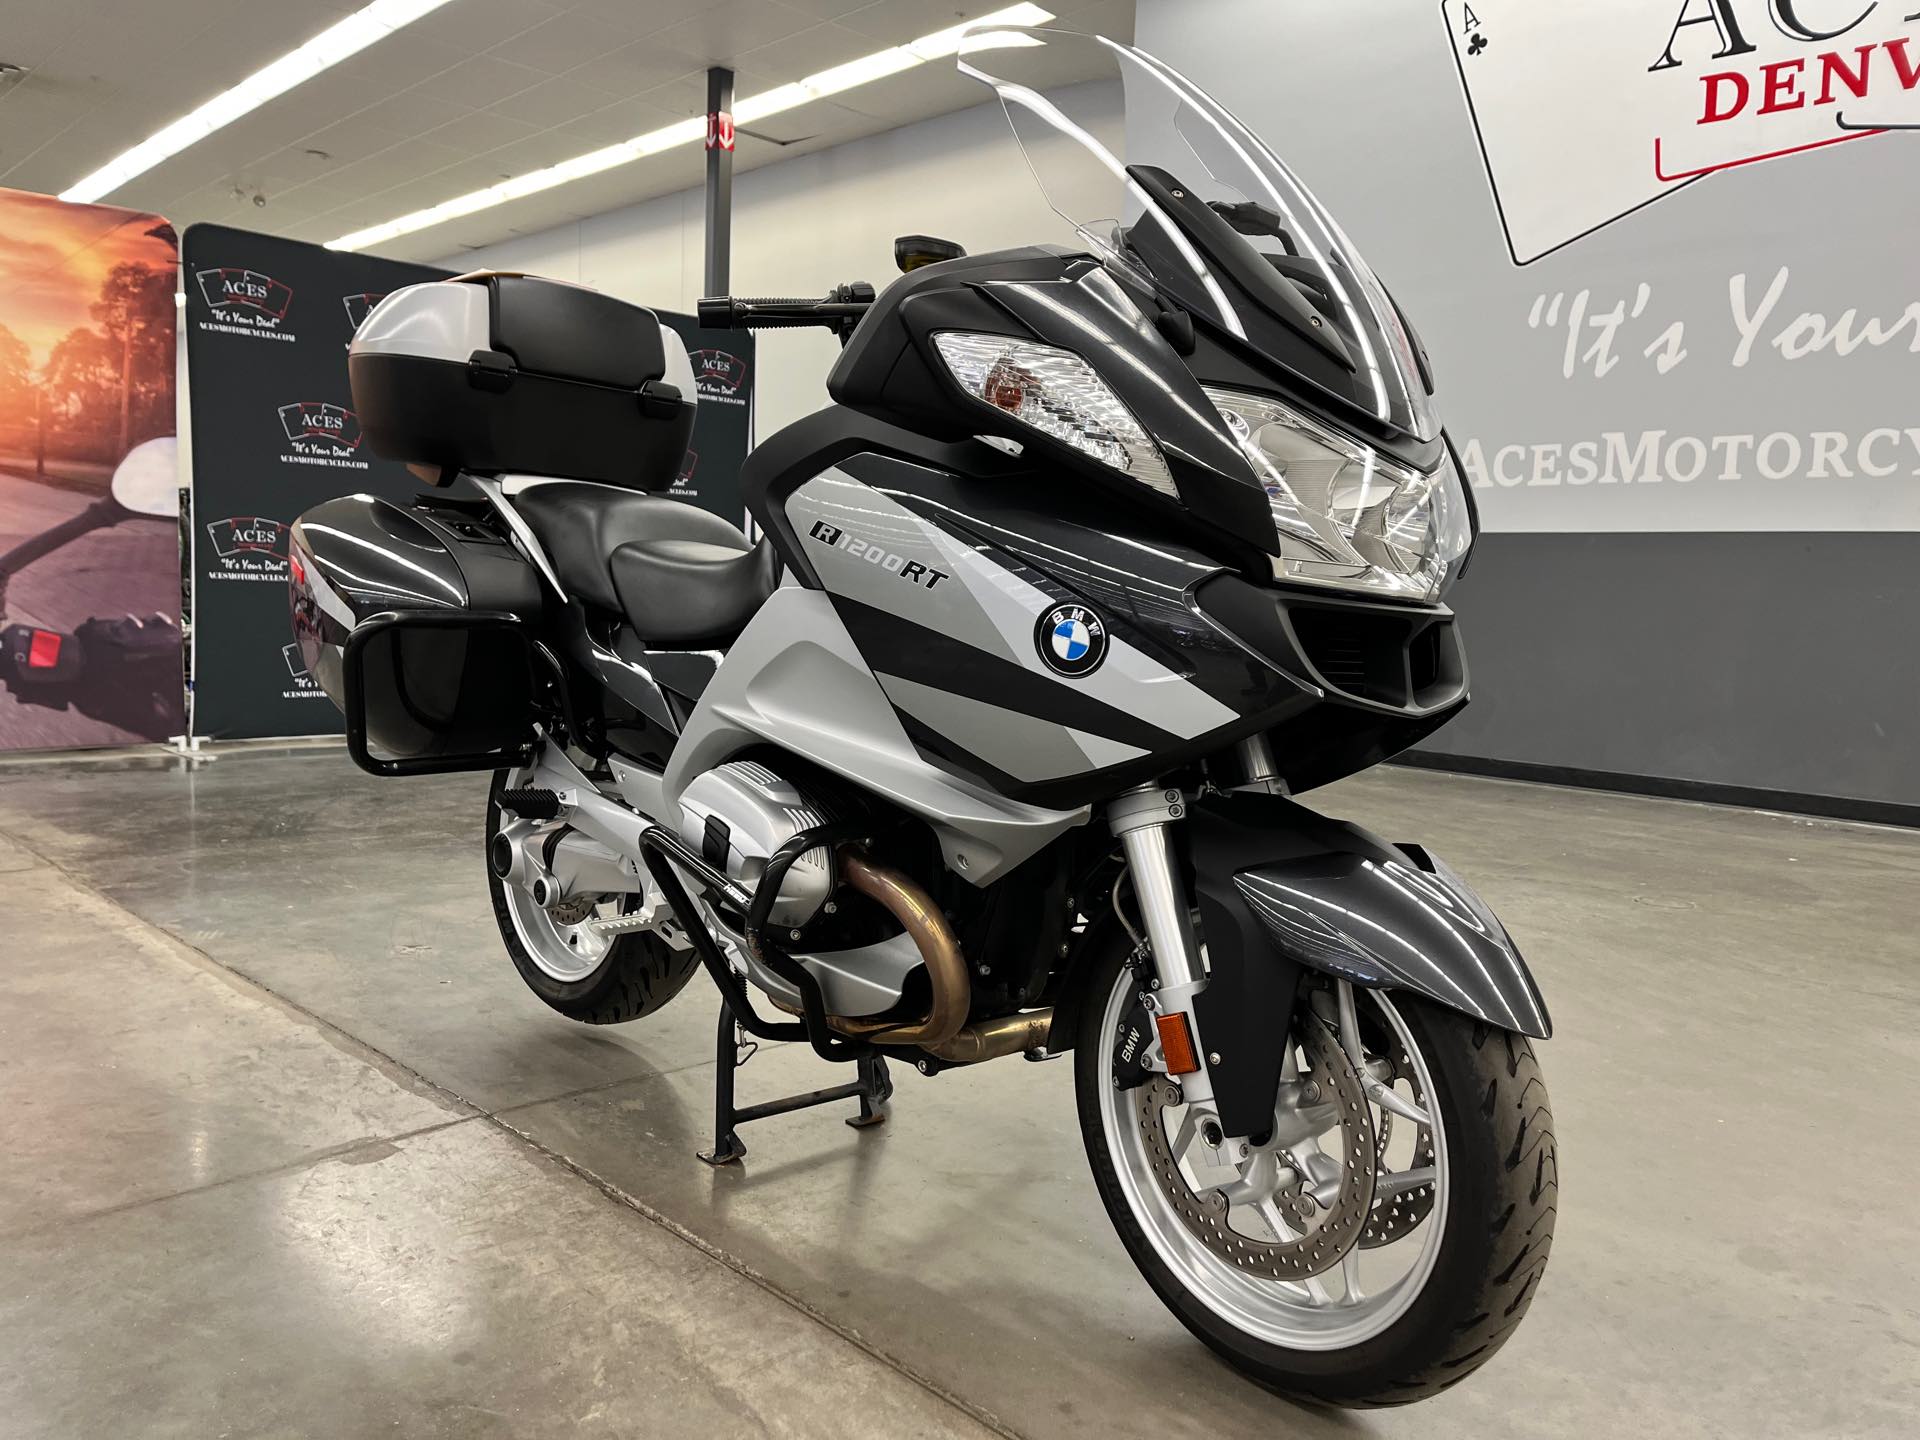 2011 BMW R 1200 RT at Aces Motorcycles - Denver